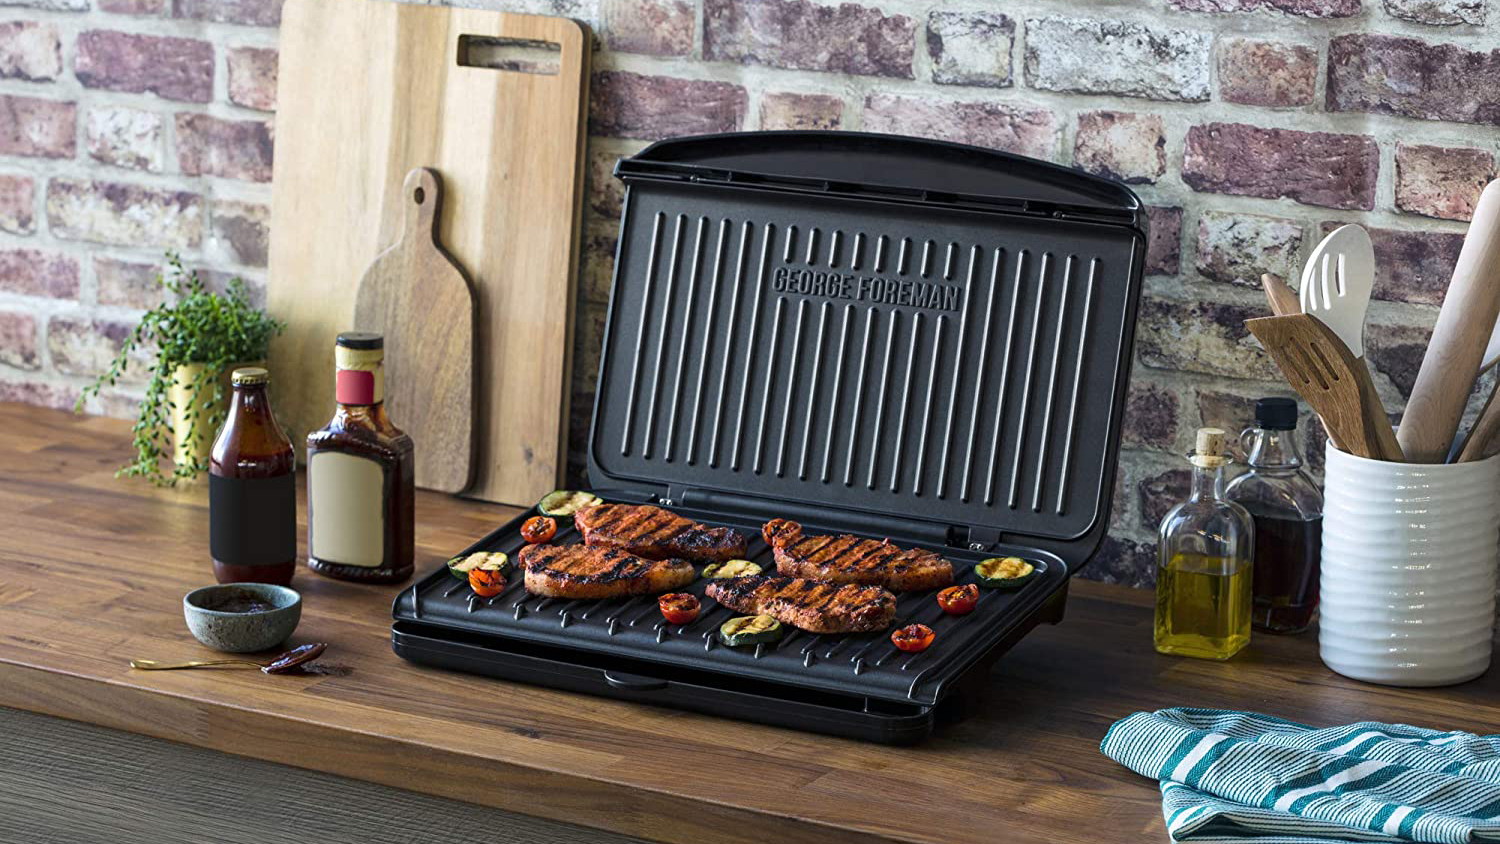 I. Introduction to George Foreman Grills